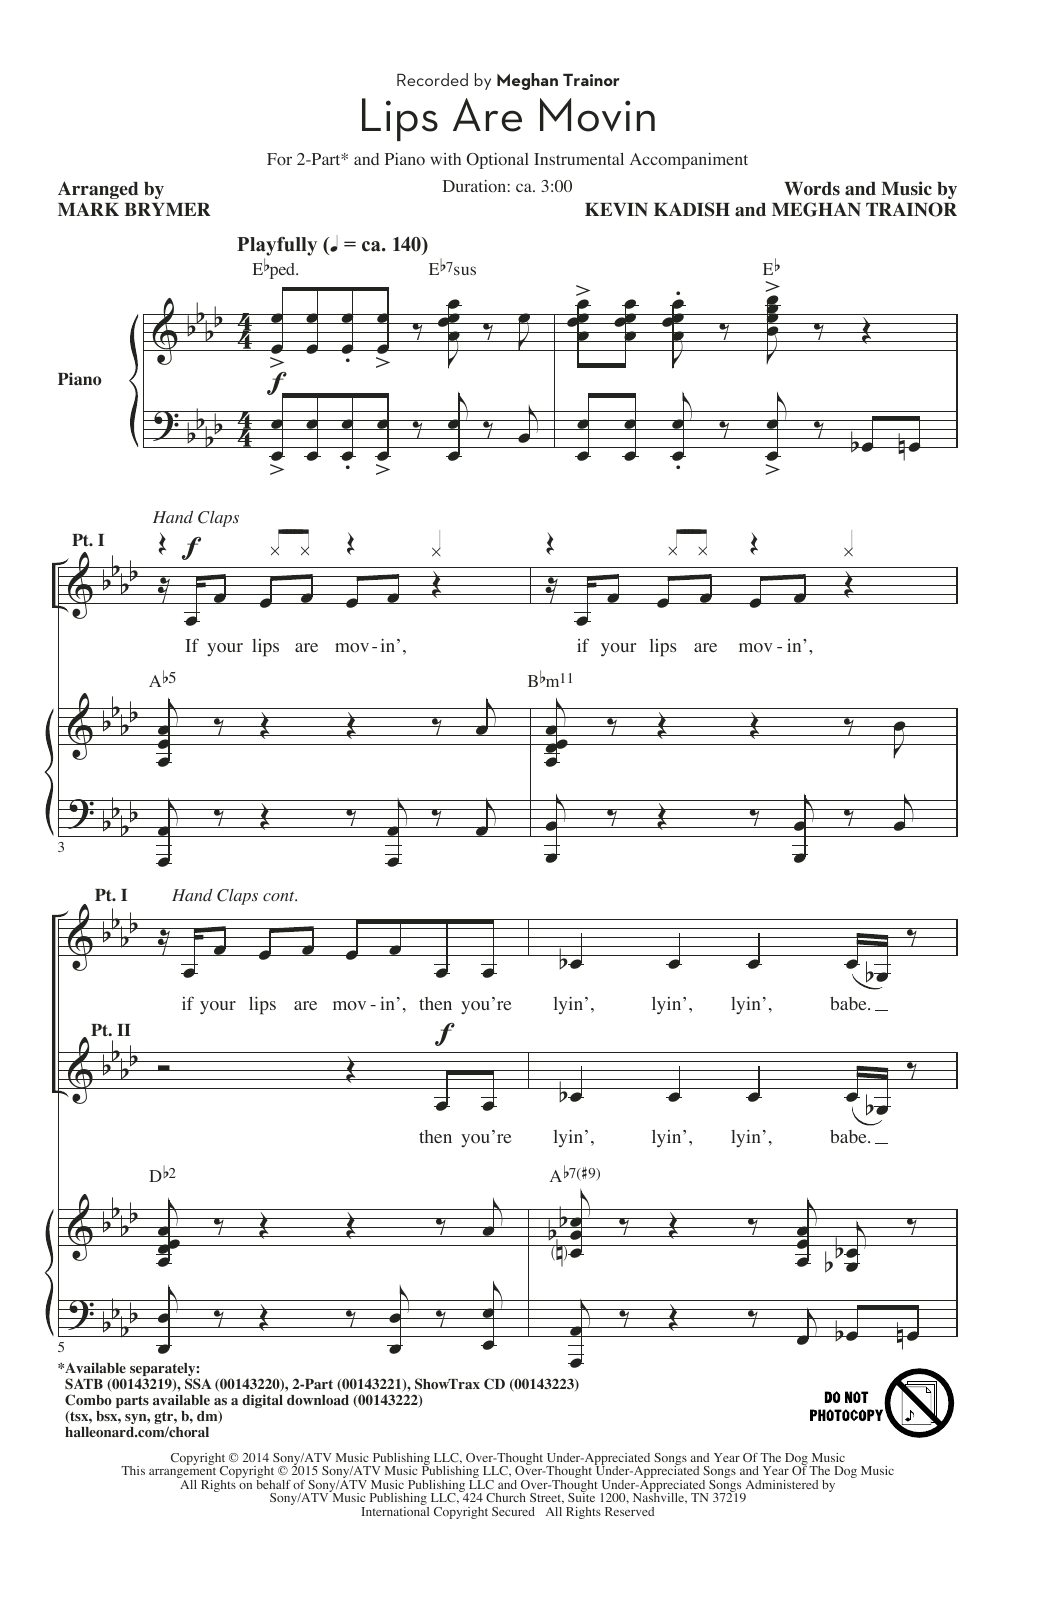 Download Meghan Trainor Lips Are Movin (arr. Mark Brymer) Sheet Music